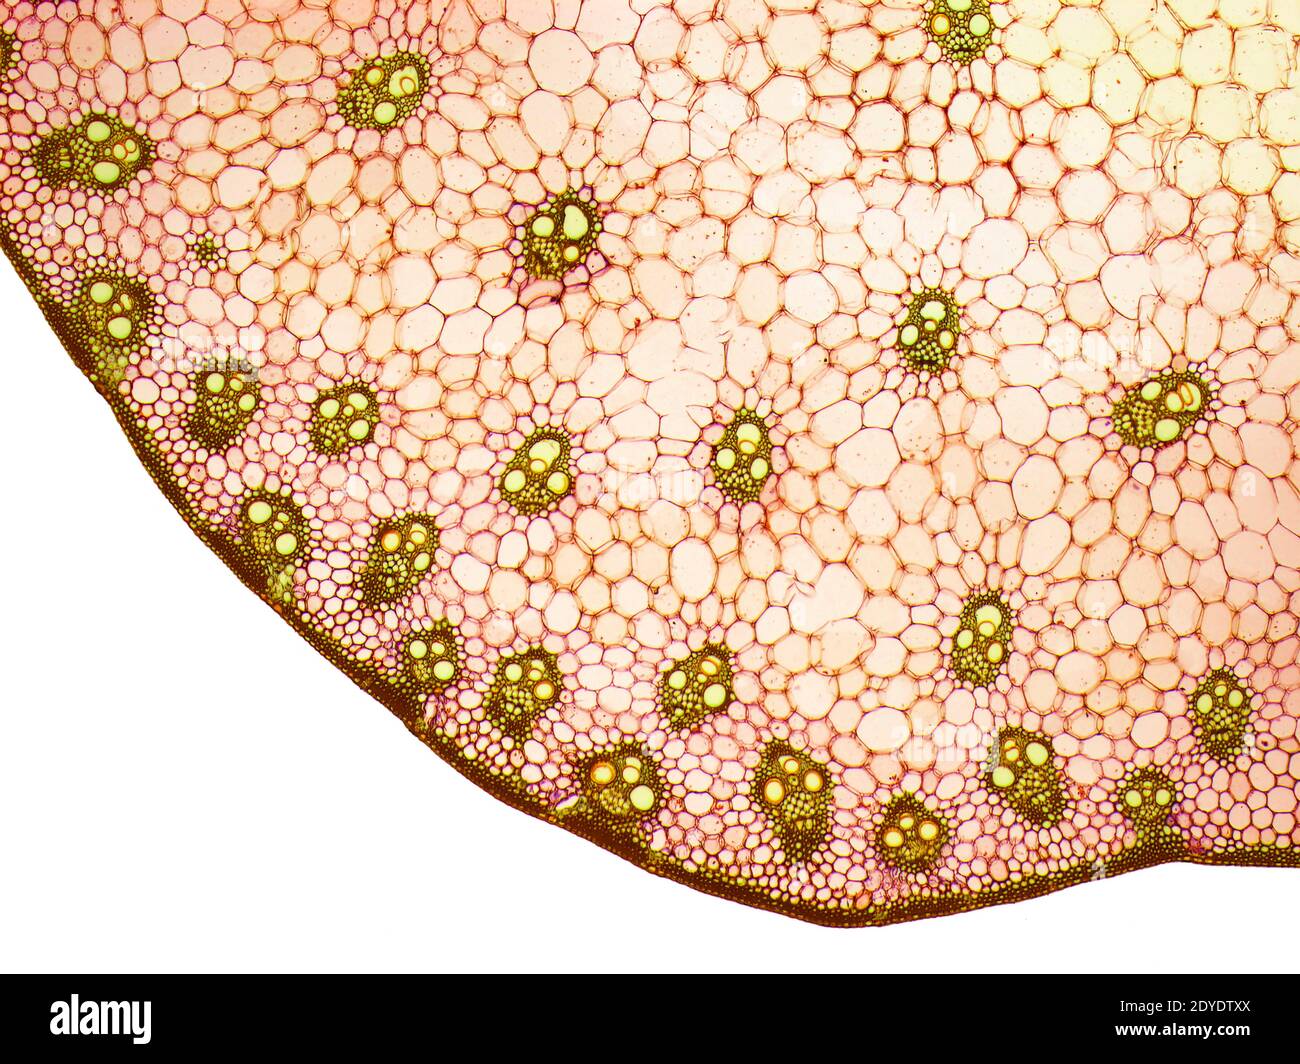 Lily stem. Light micrograph(LM) of a section through a part of a lily (Lilium) stem. Stock Photo